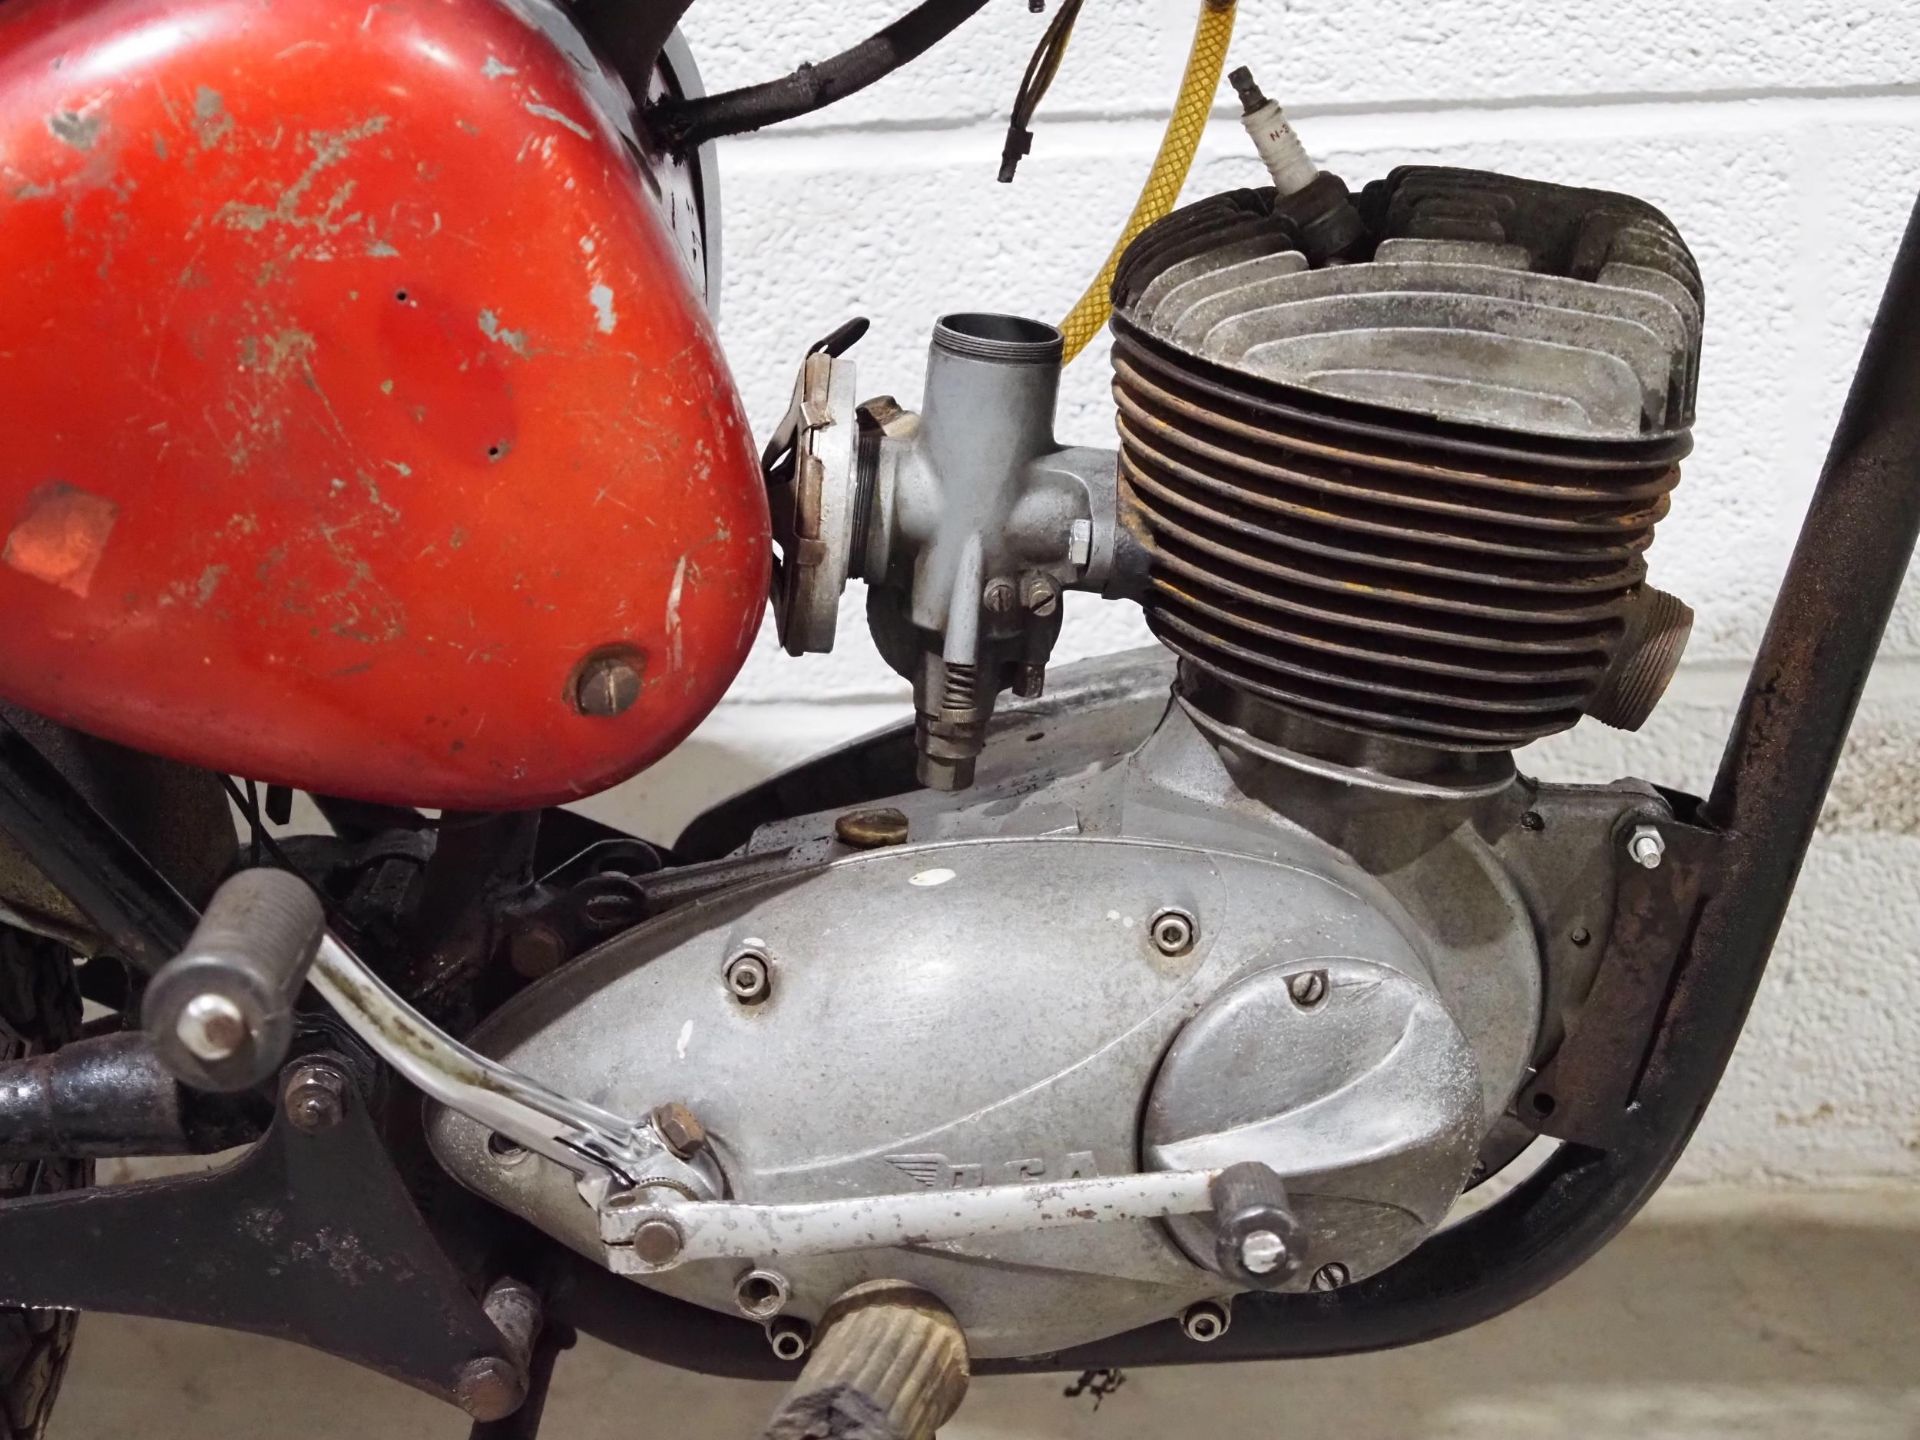 BSA Bantam D10 motorcycle project. 1967. 175cc. Engine turns over with compression. Reg. KHA 419E. - Image 4 of 6